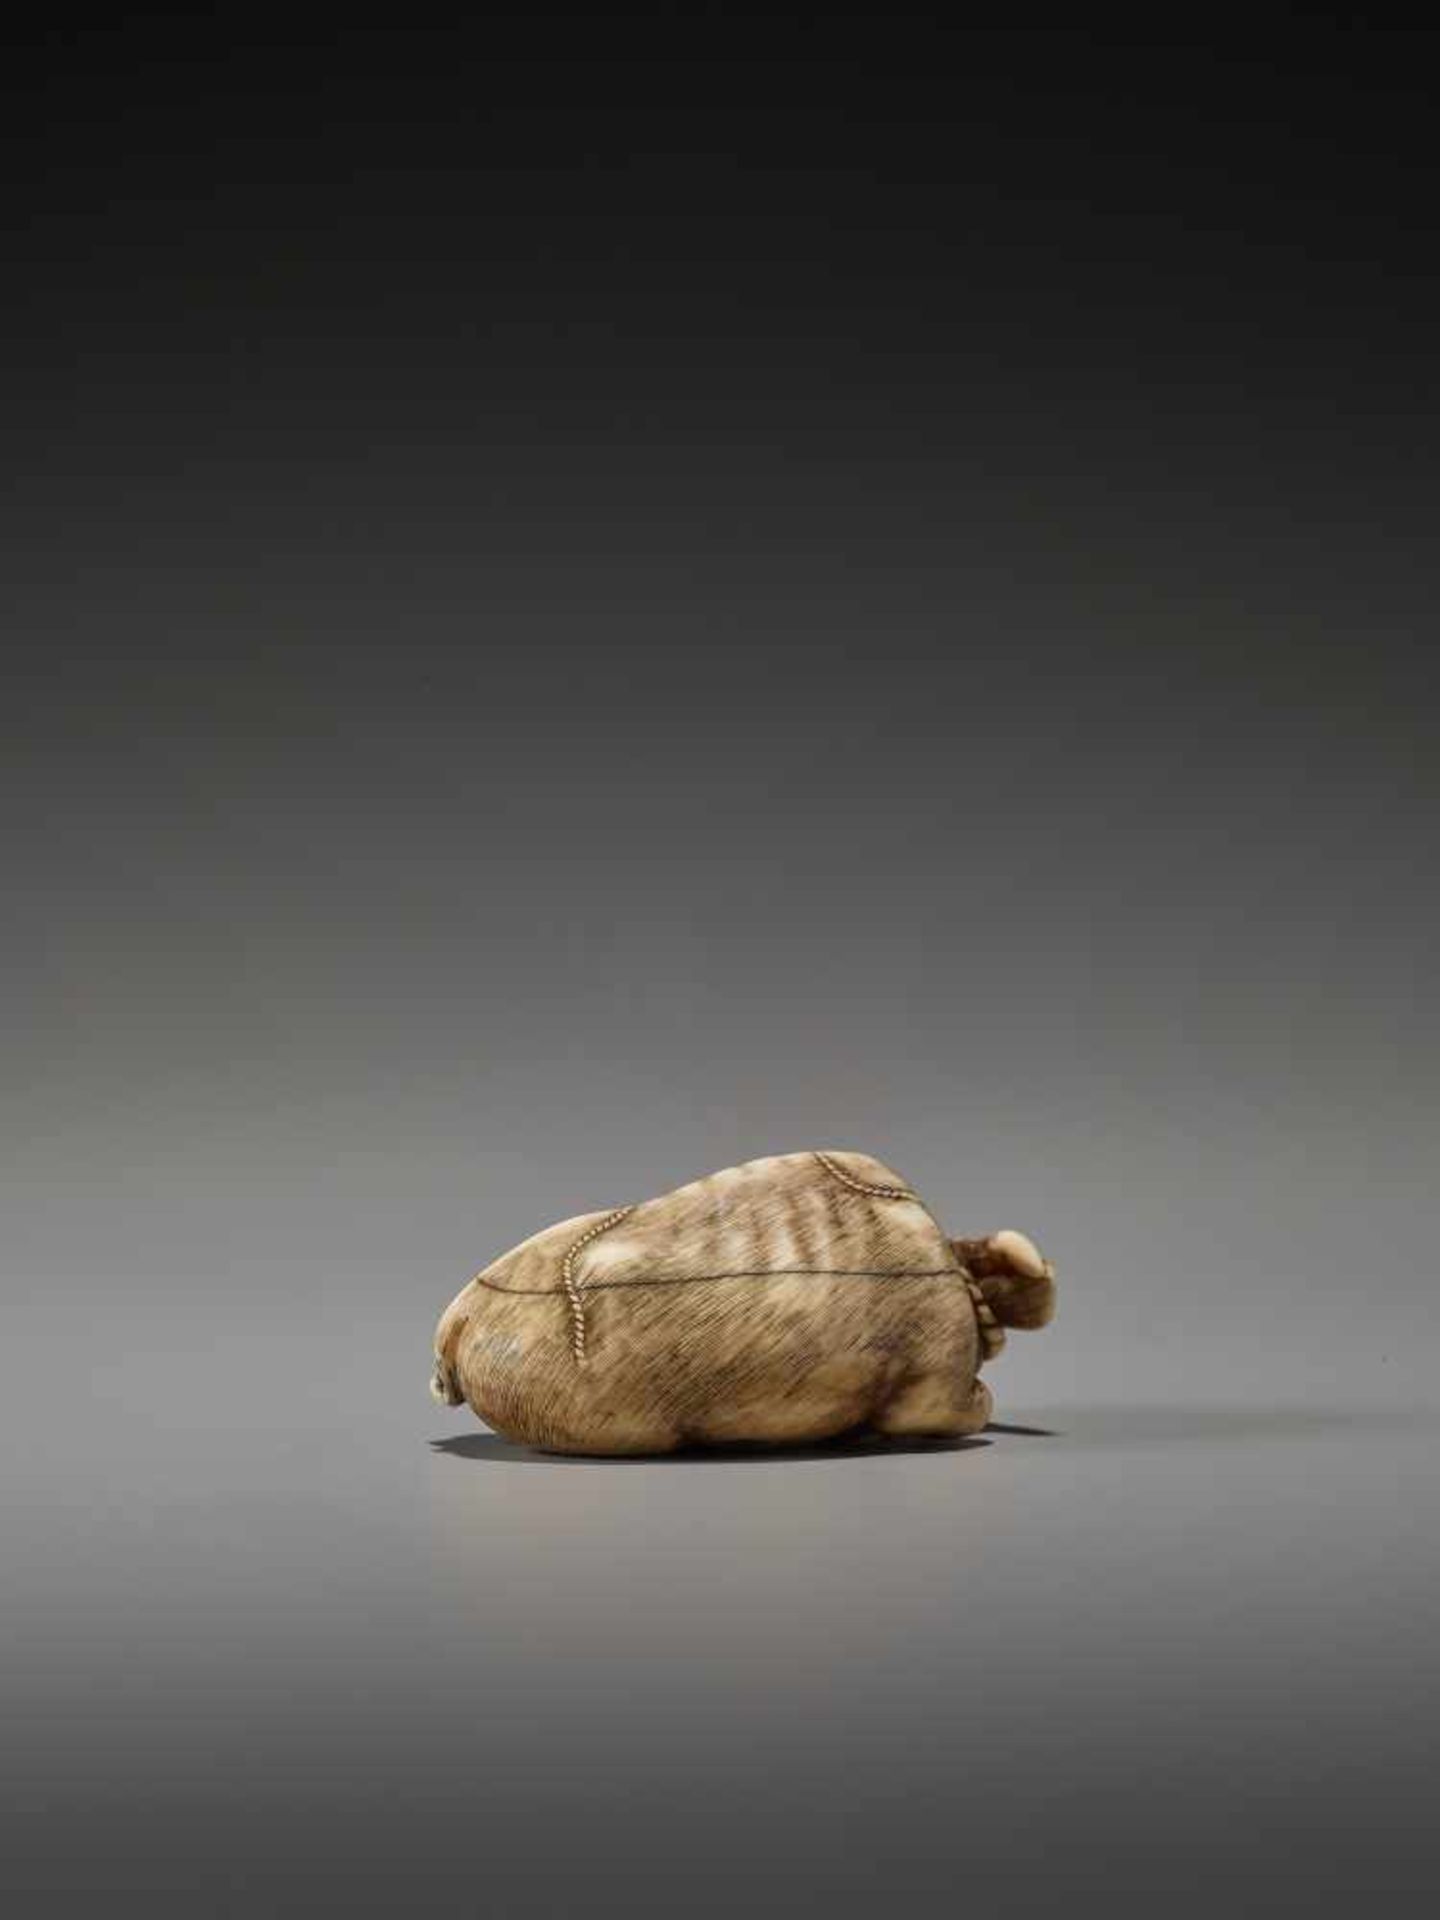 AN EXCELLENT IVORY NETSUKE OF A RECUMBENT OX BY TOMOTADABy Tomotada, ivory netsukeJapan, Kyoto, 18th - Image 4 of 12